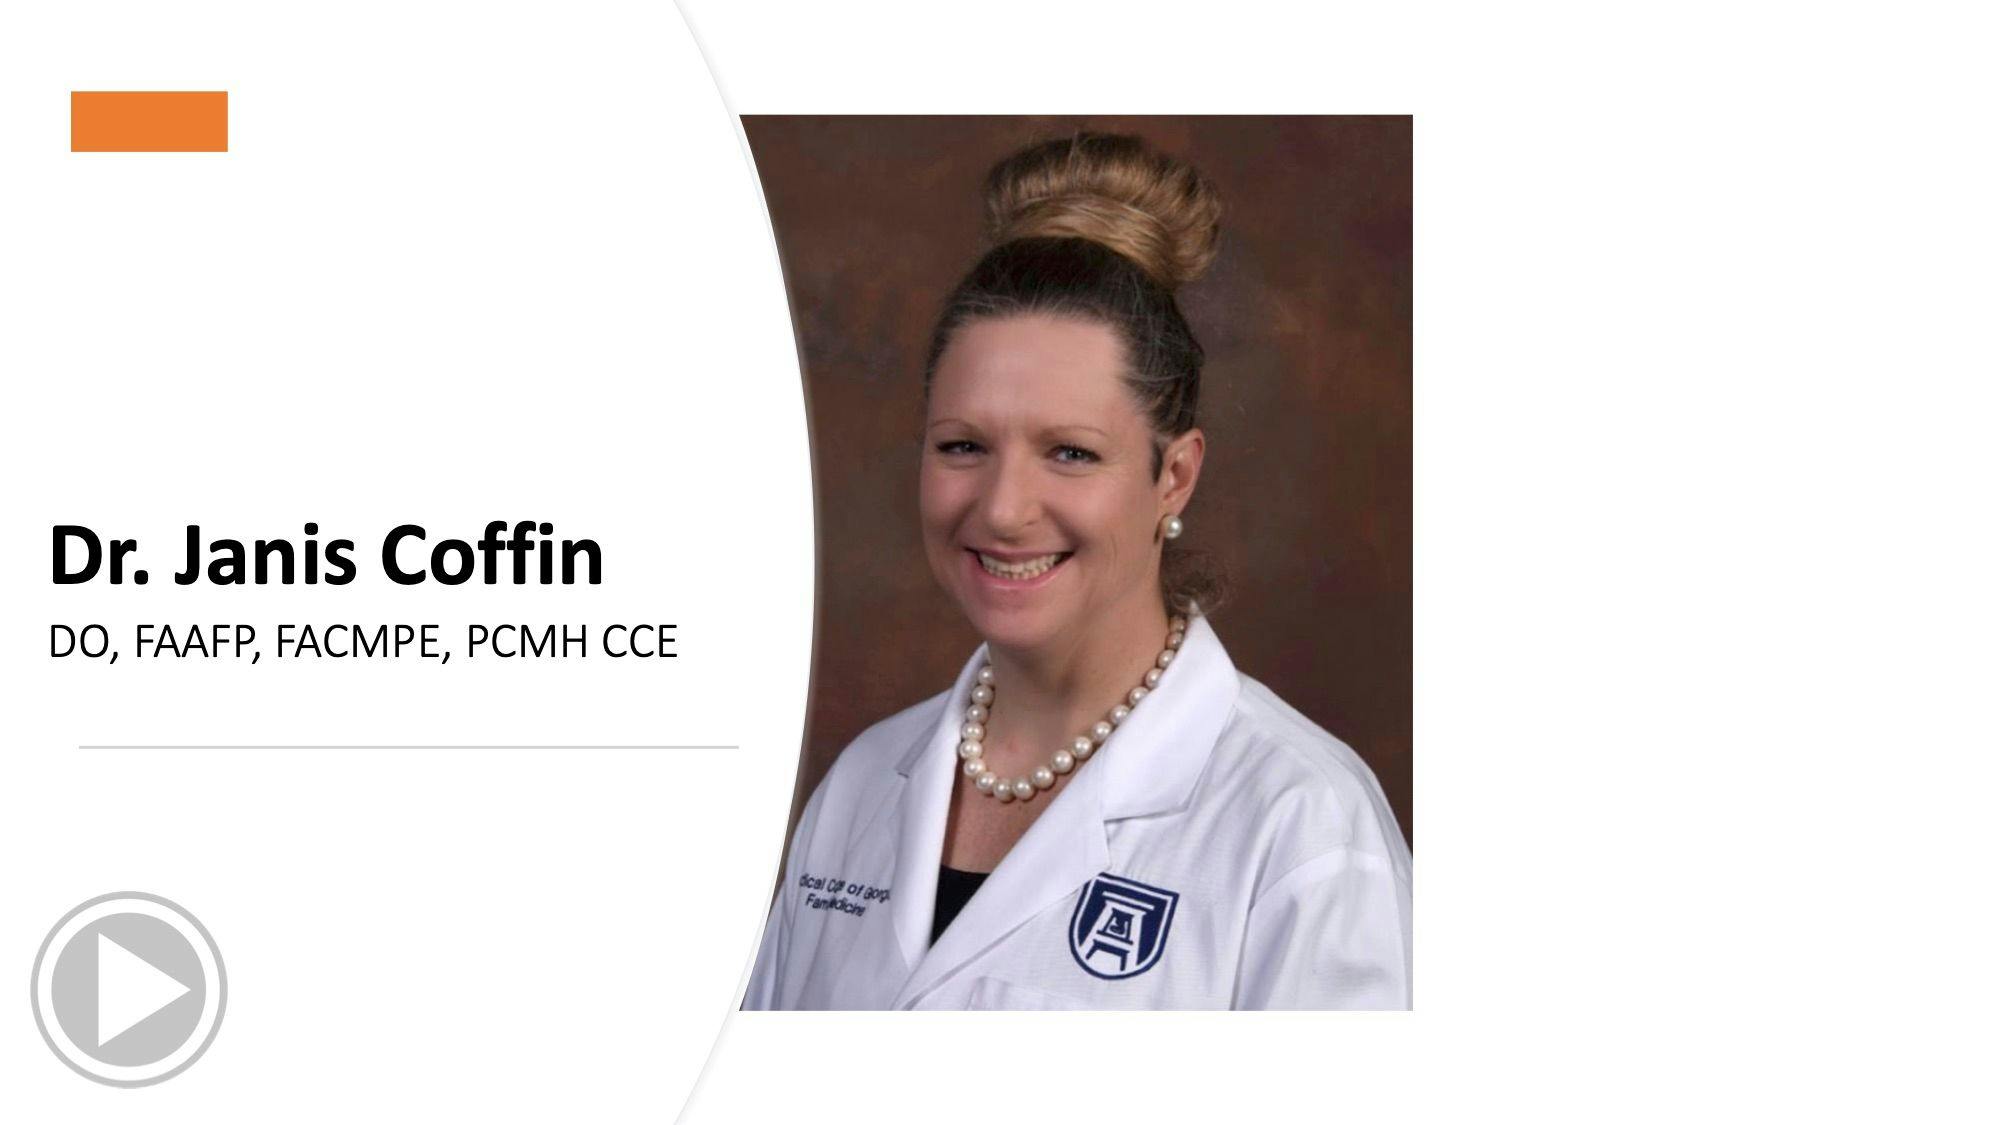 Dr. Janis Coffin, DO